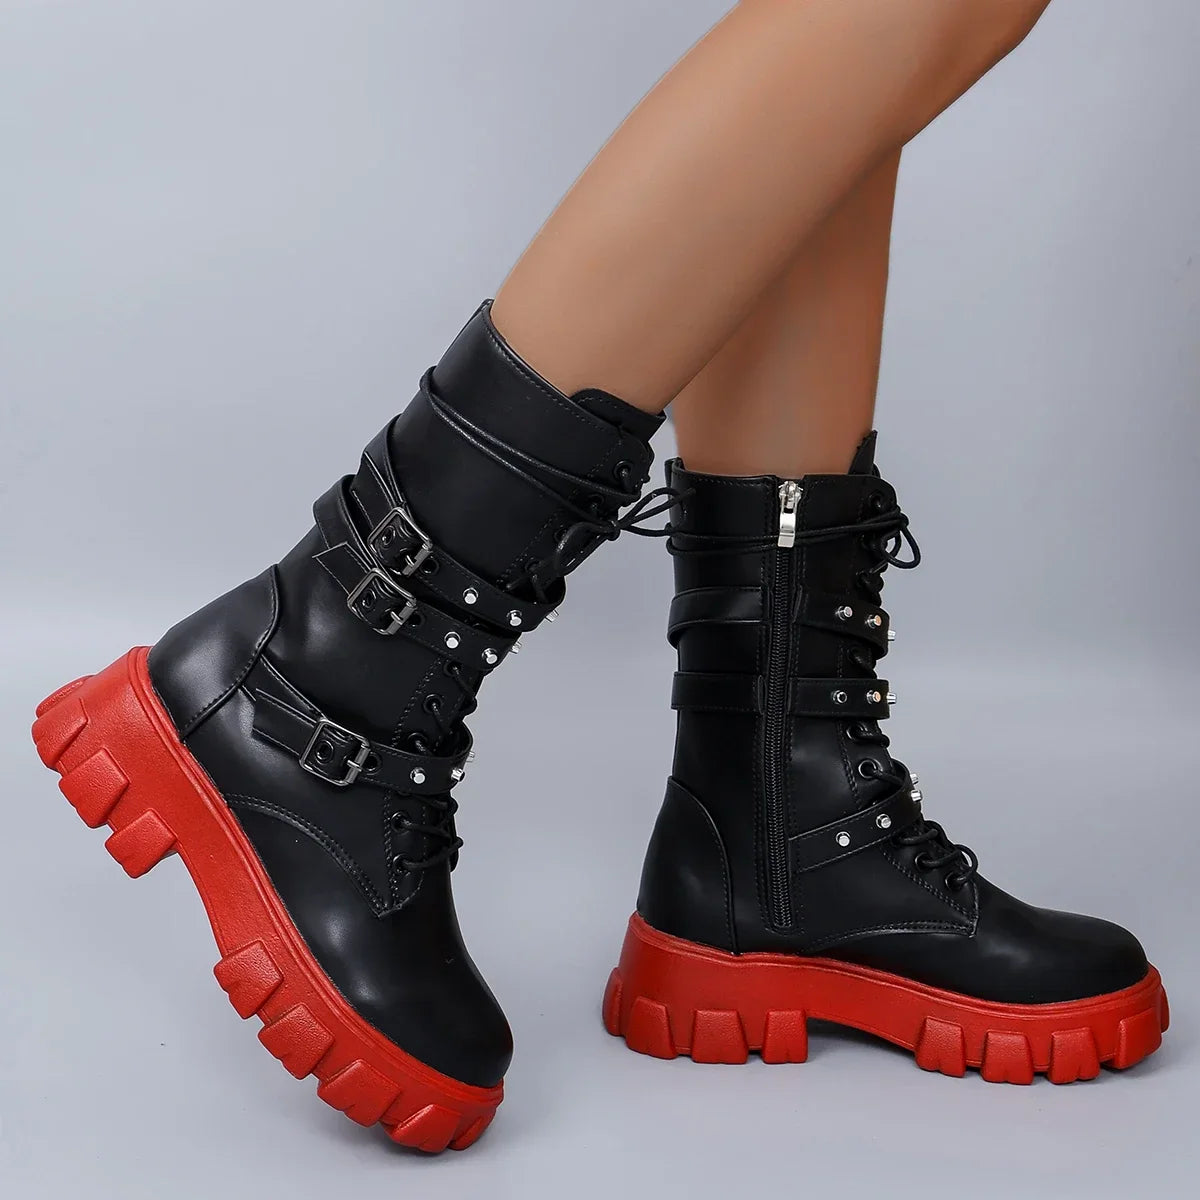 Canmol Big Red Punk Boots with Belt Buckle and Side Zipper